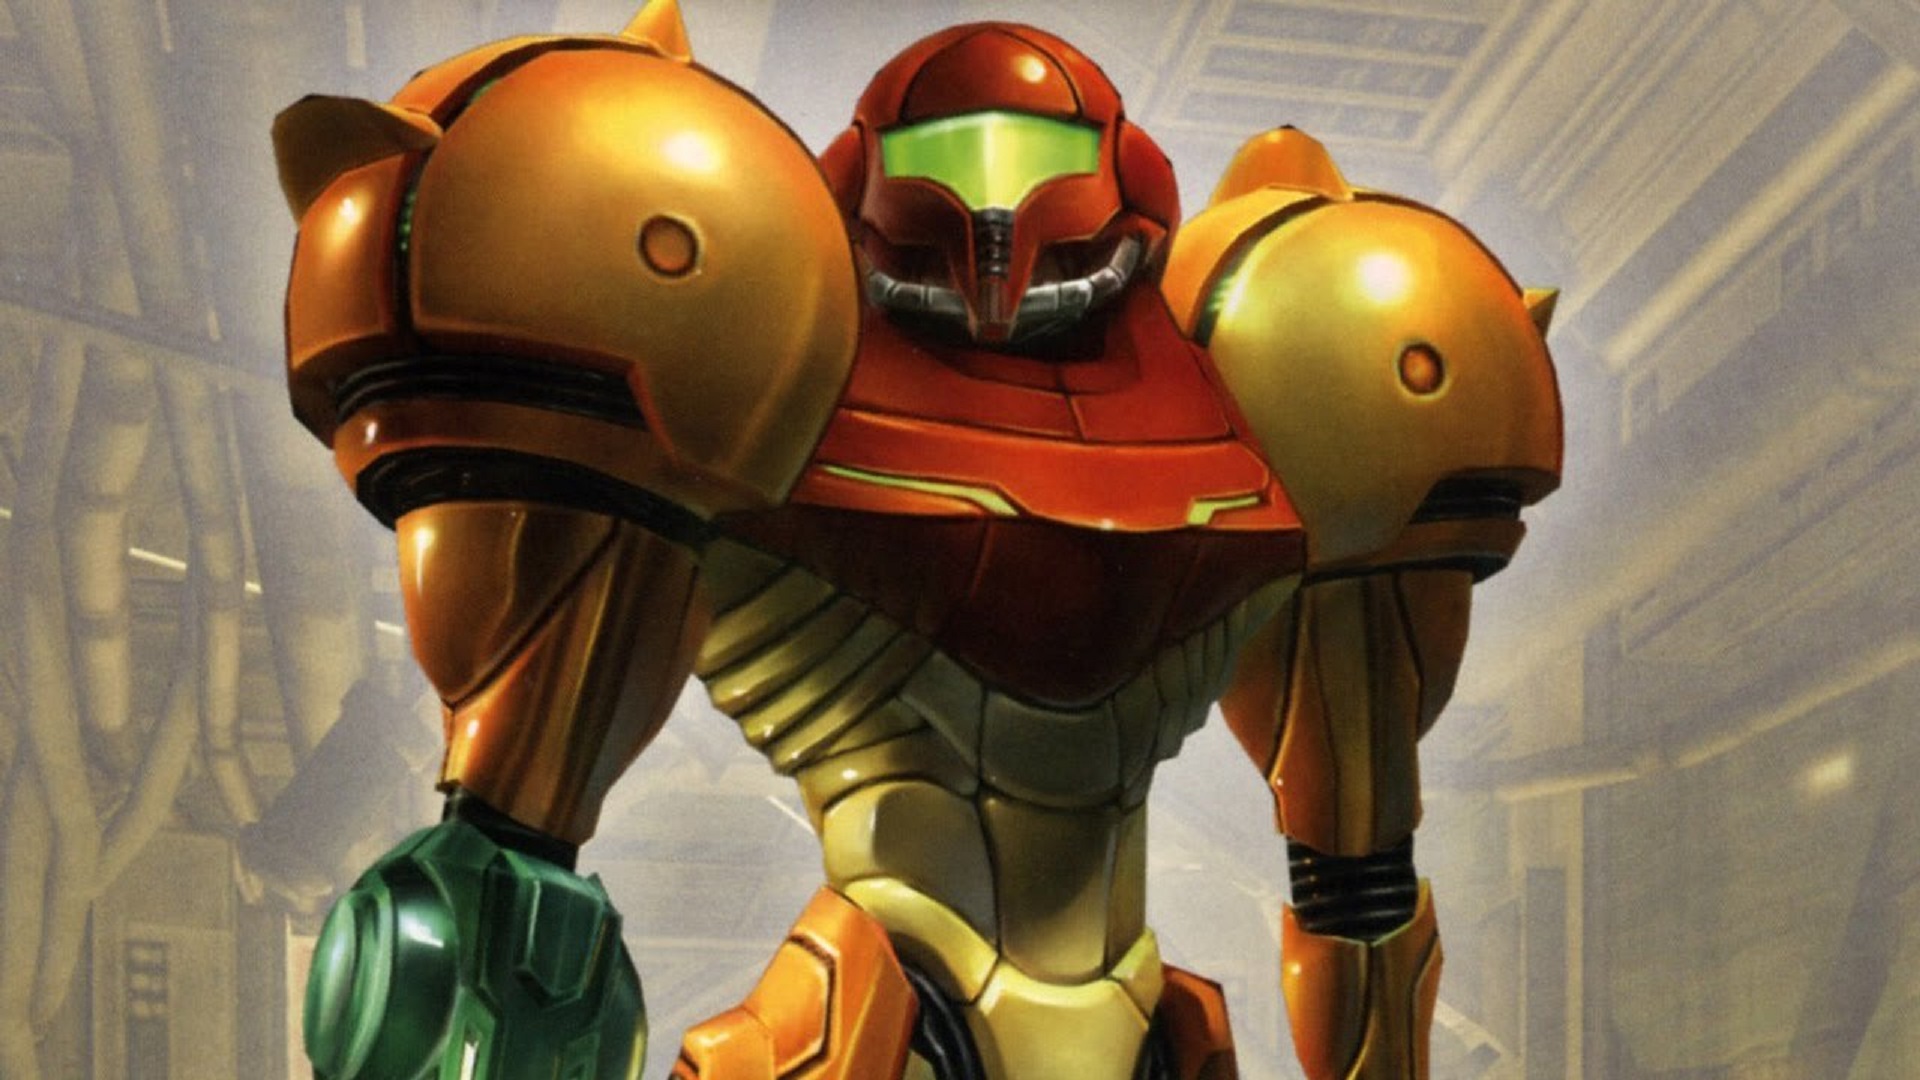 Metroid Prime 1’s Alleged Remaster Wrapped up Development Over the